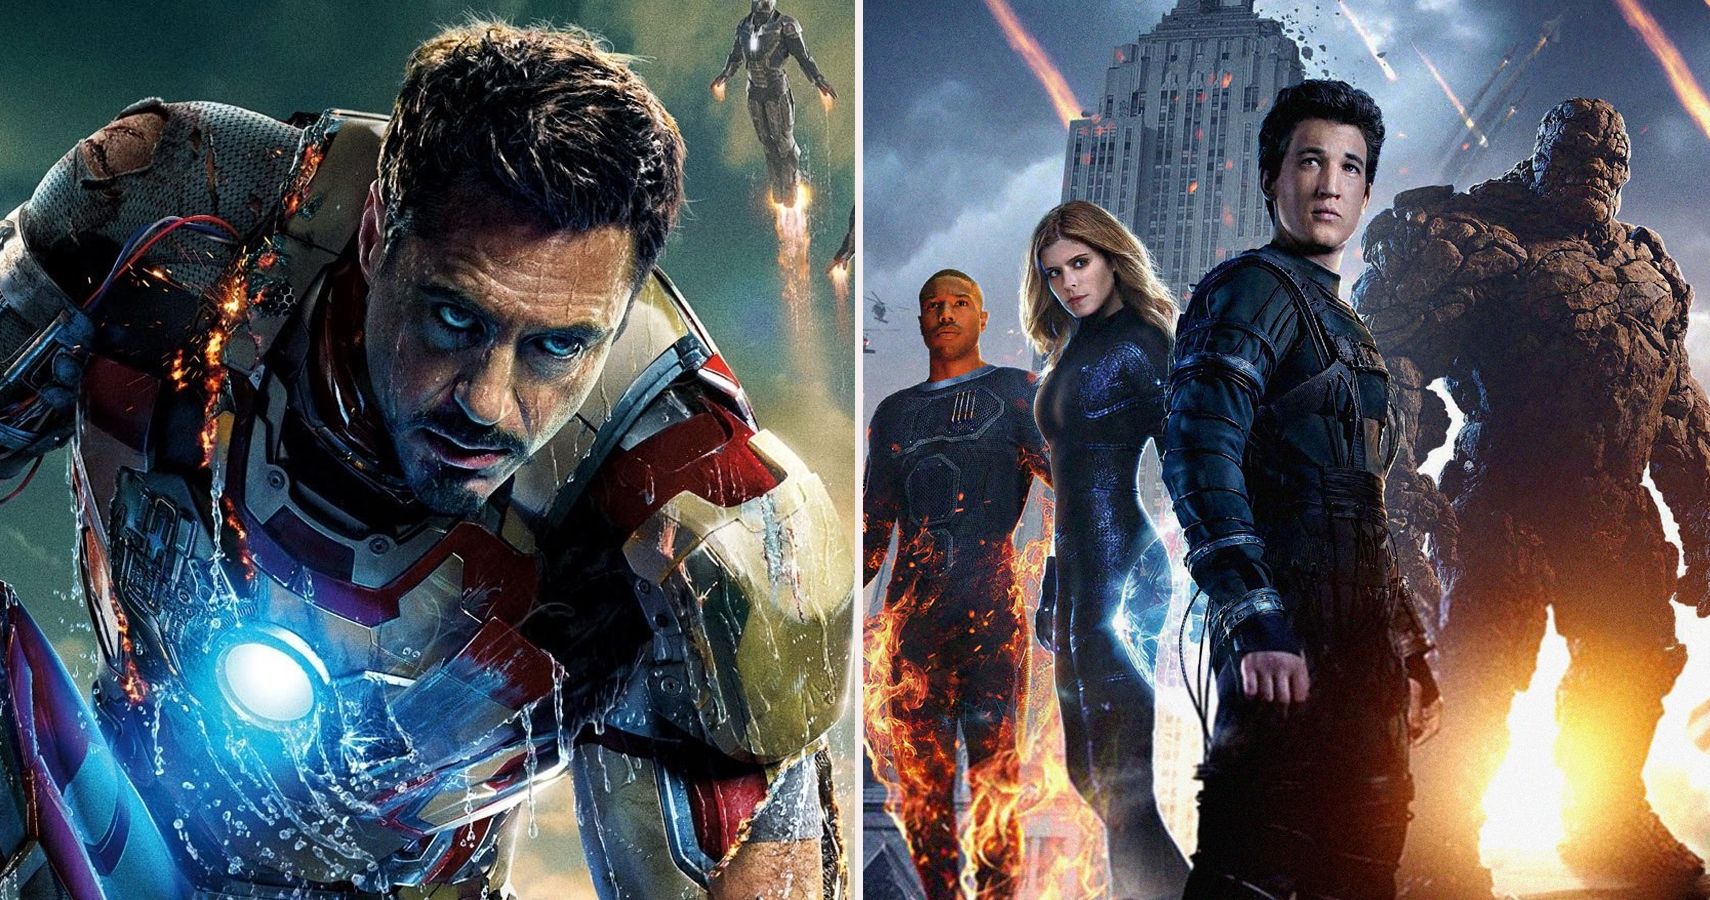 Top Marvel movies listed according to their IMDb ratings: Iron Man